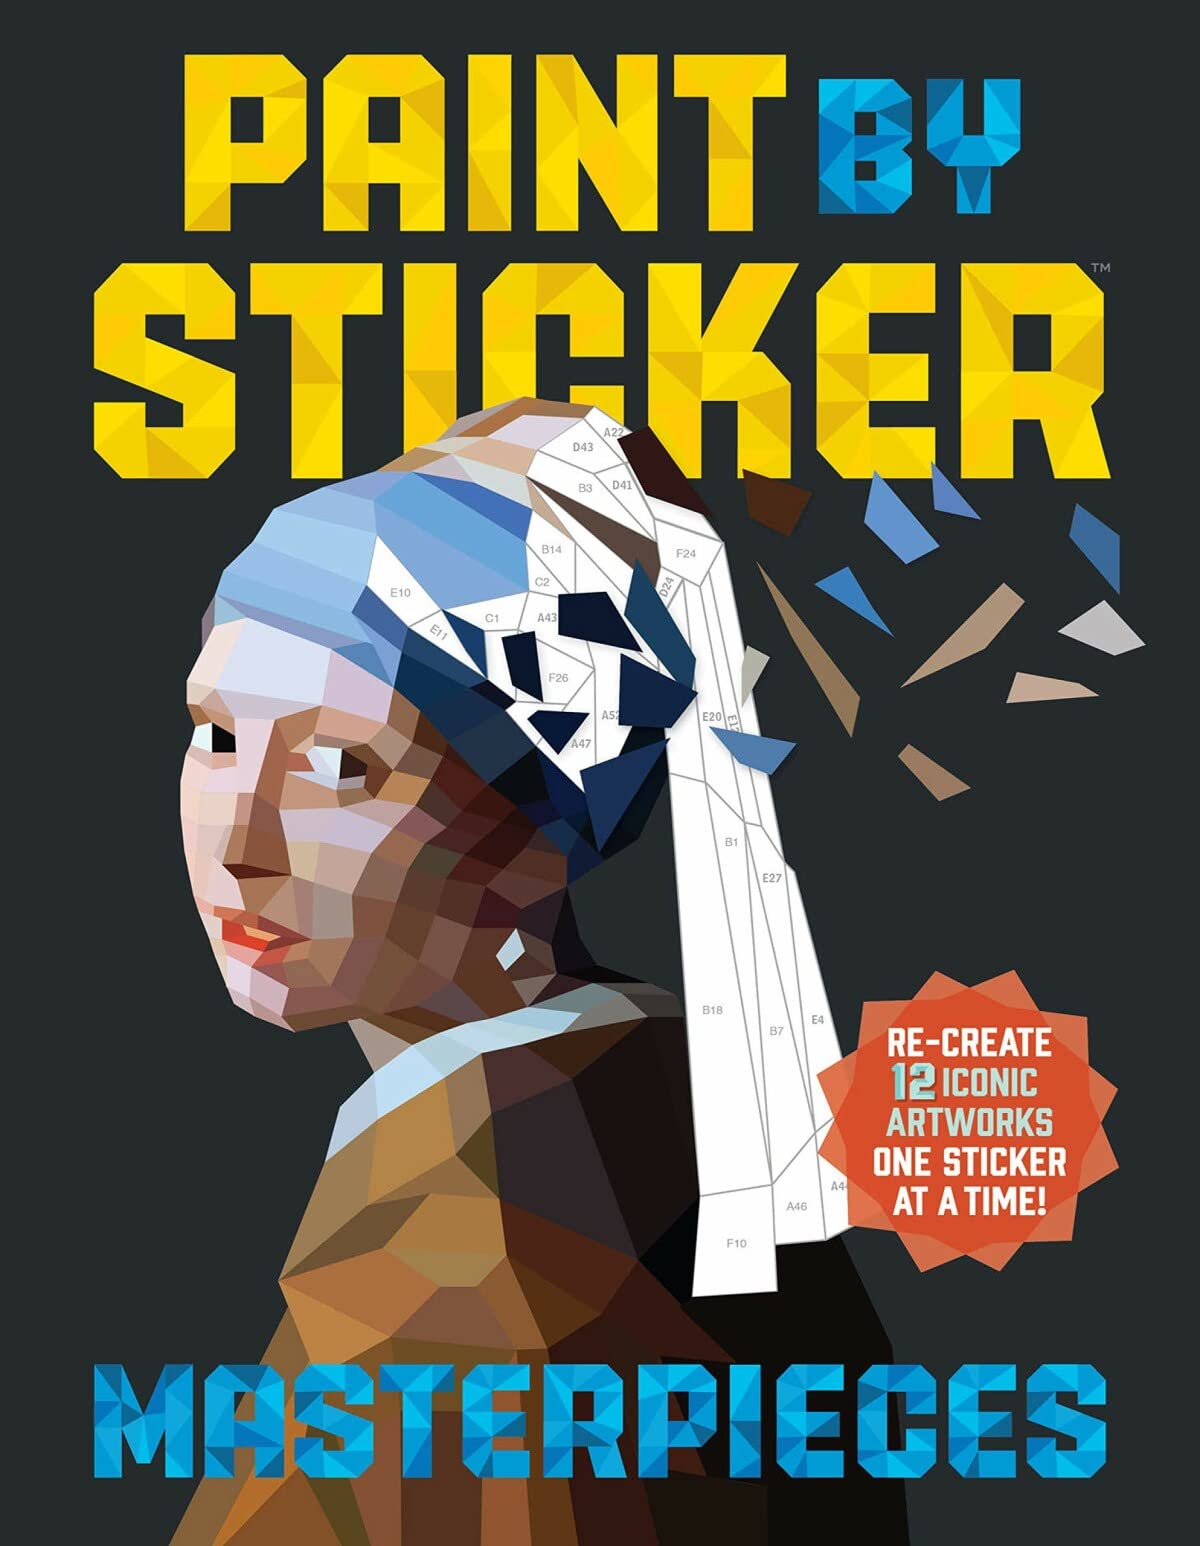 Paint by Sticker Masterpieces: Re-create 12 Iconic Artworks One Sticker at a Time! [Book]